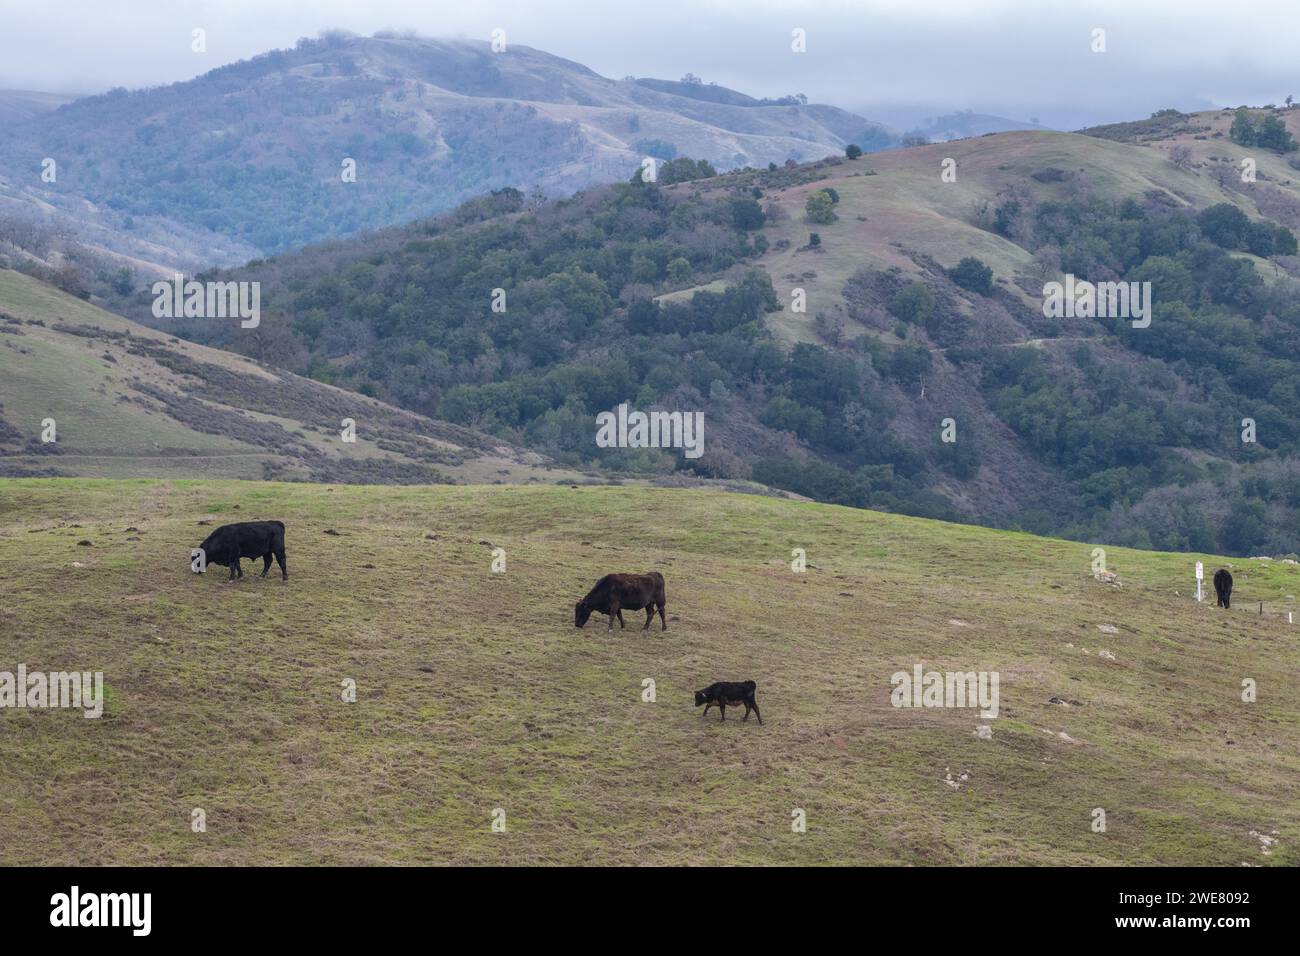 A herd of cattle grazing in the open landscape of Sierra Vista open space in the San Francisco Bay area of California. Stock Photo